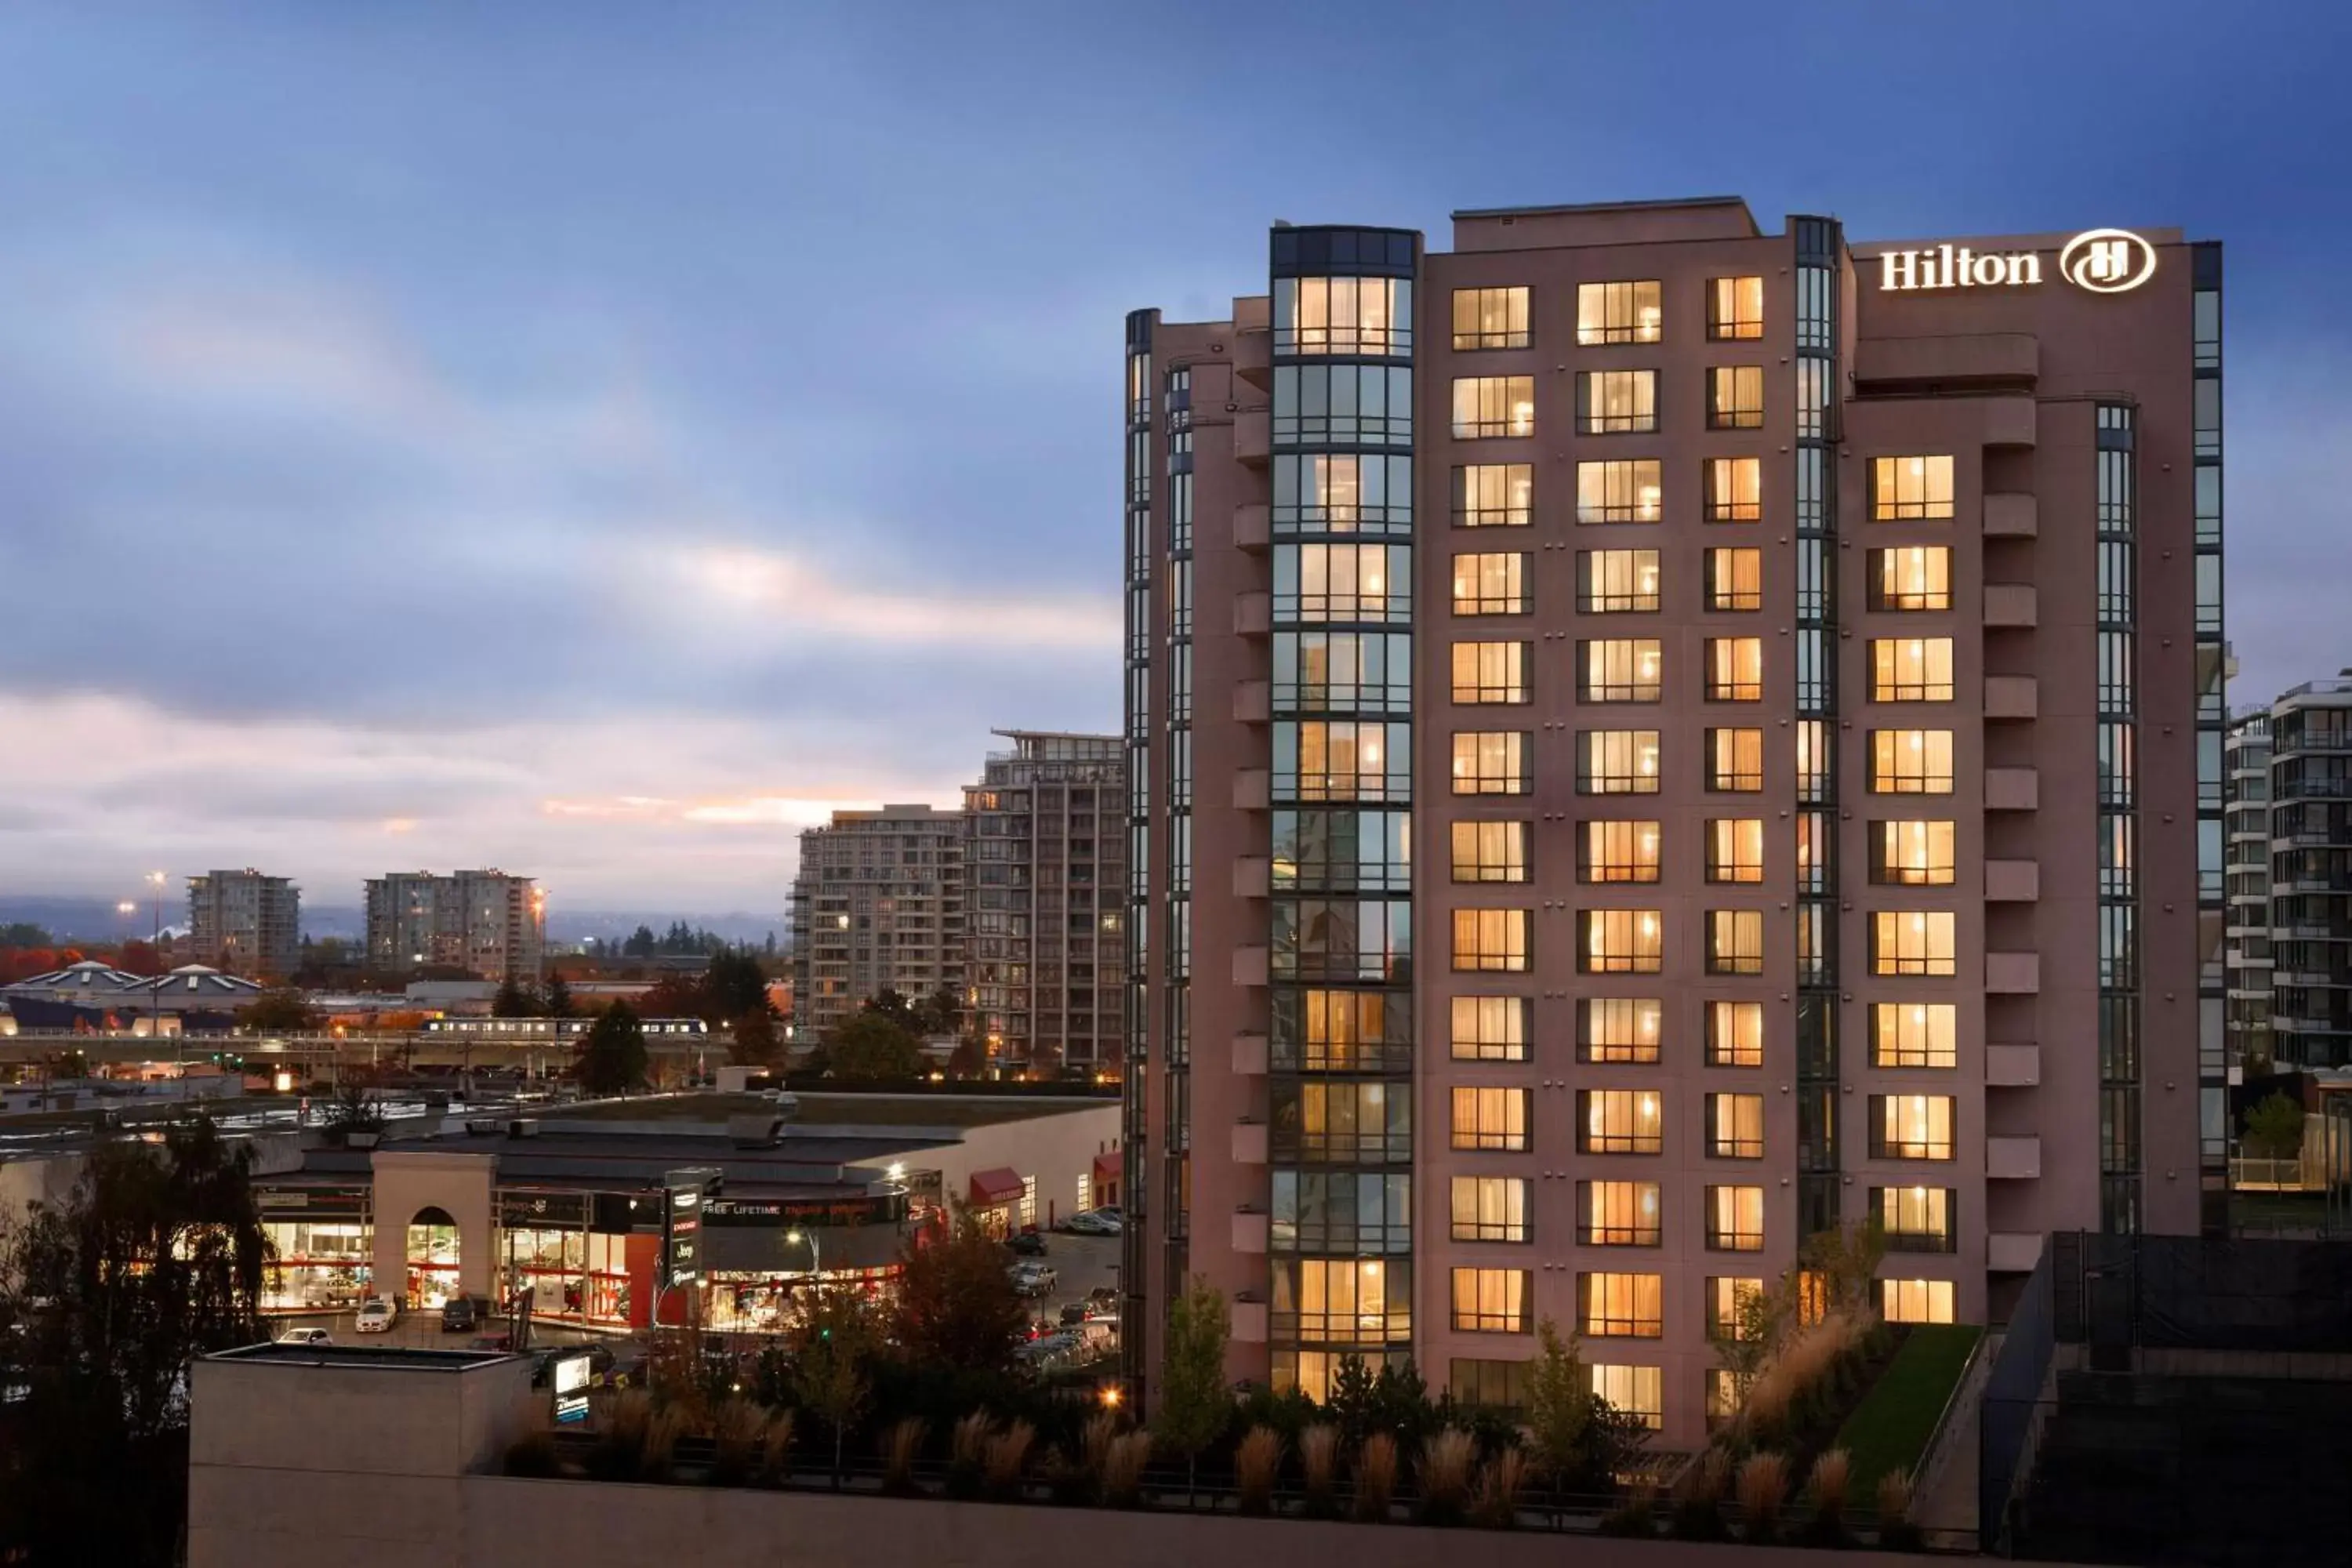 Property building in Hilton Vancouver Airport